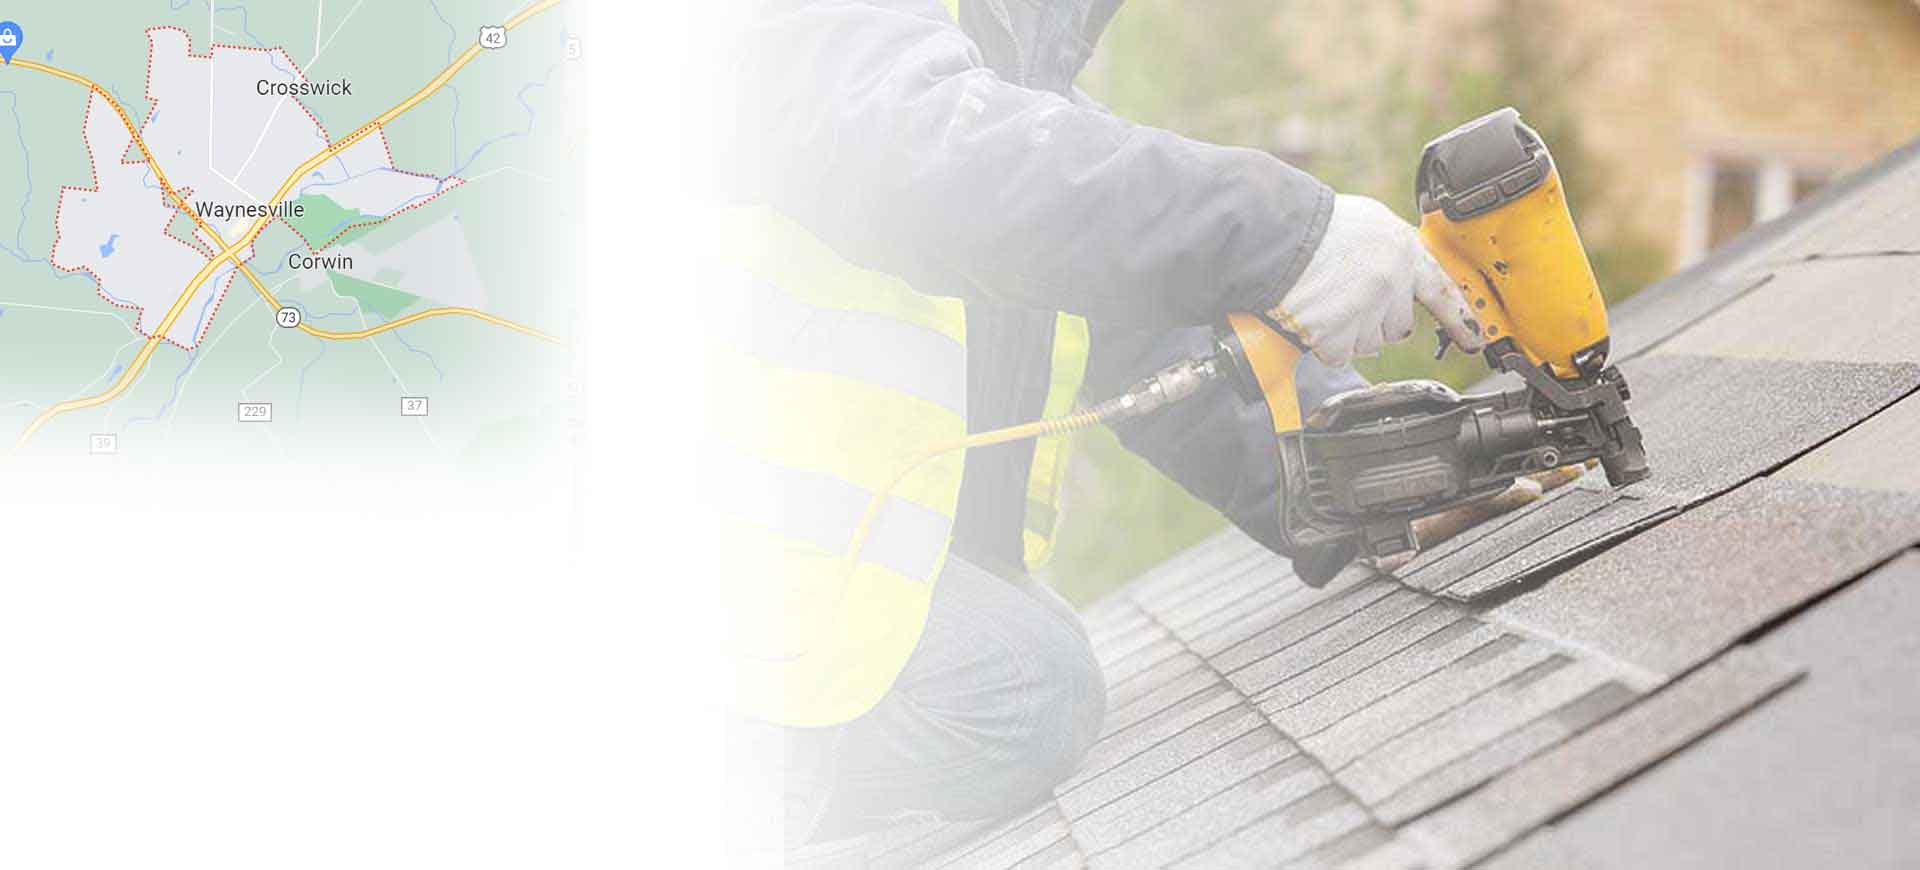 Waynesville Ohio Roofing, Siding and Gutters - Contractor